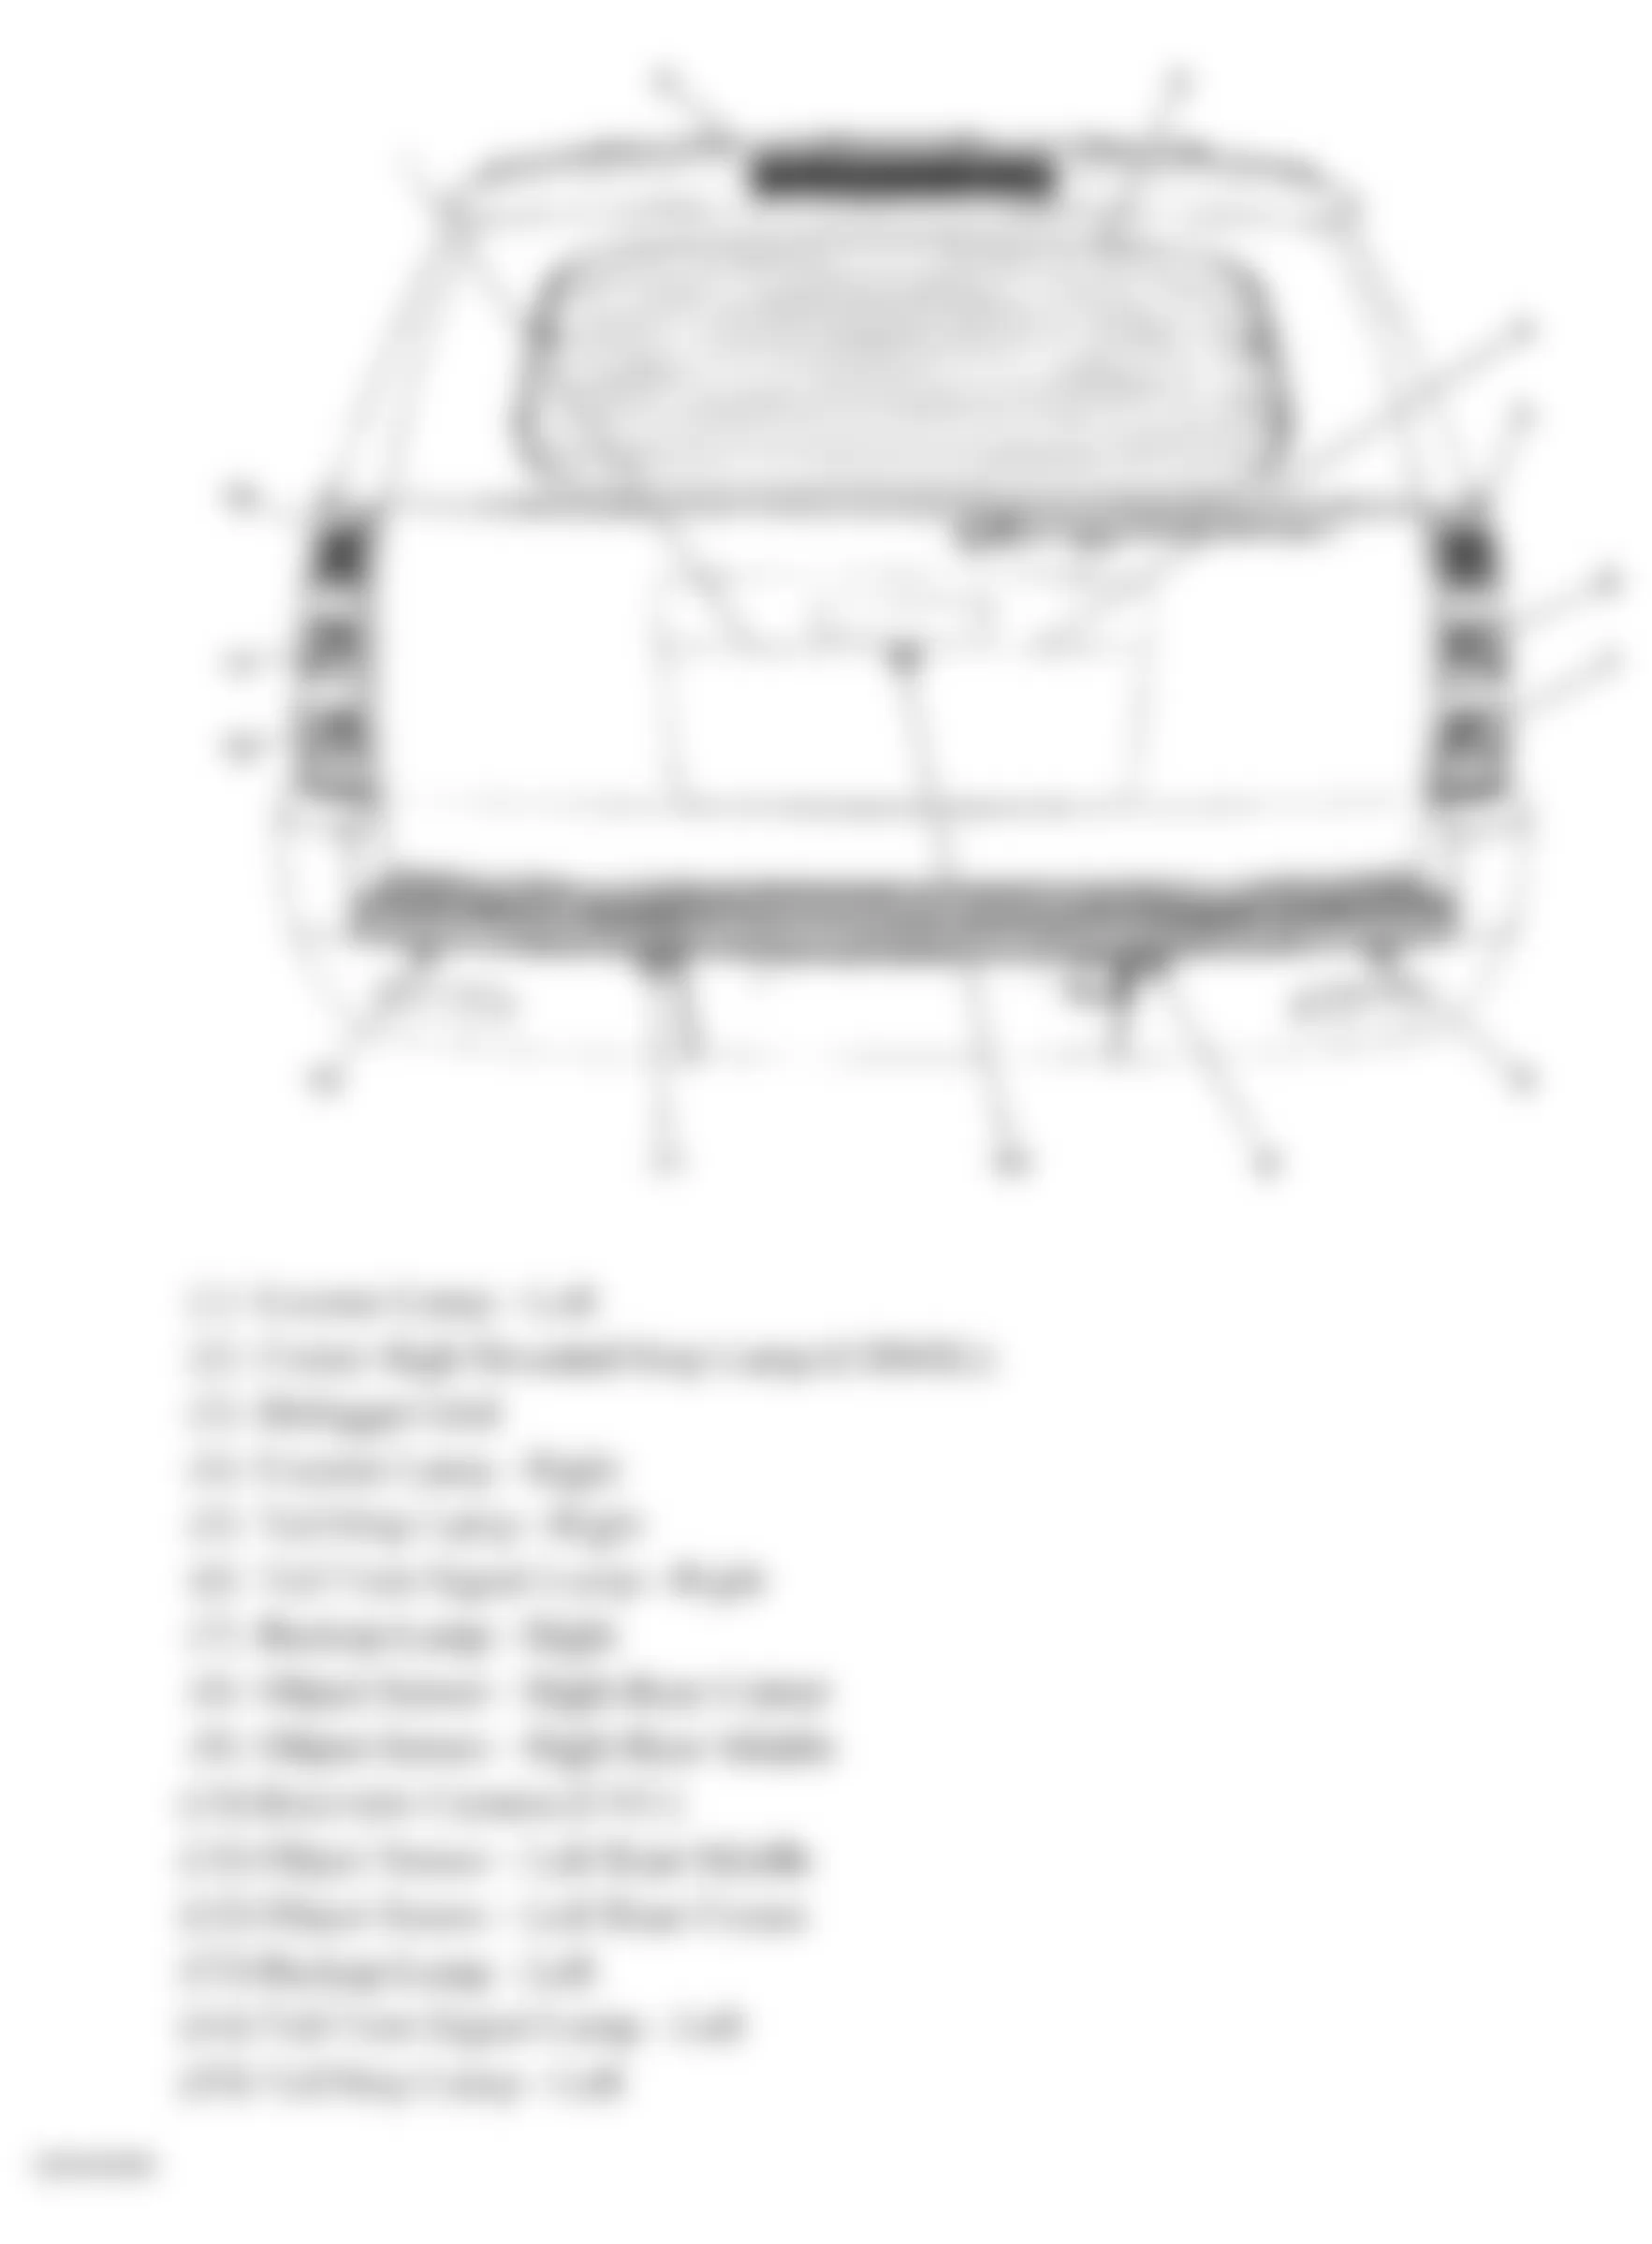 Chevrolet Suburban C2500 2008 - Component Locations -  Rear Of Vehicle (Yukon W/One Piece Liftgate)